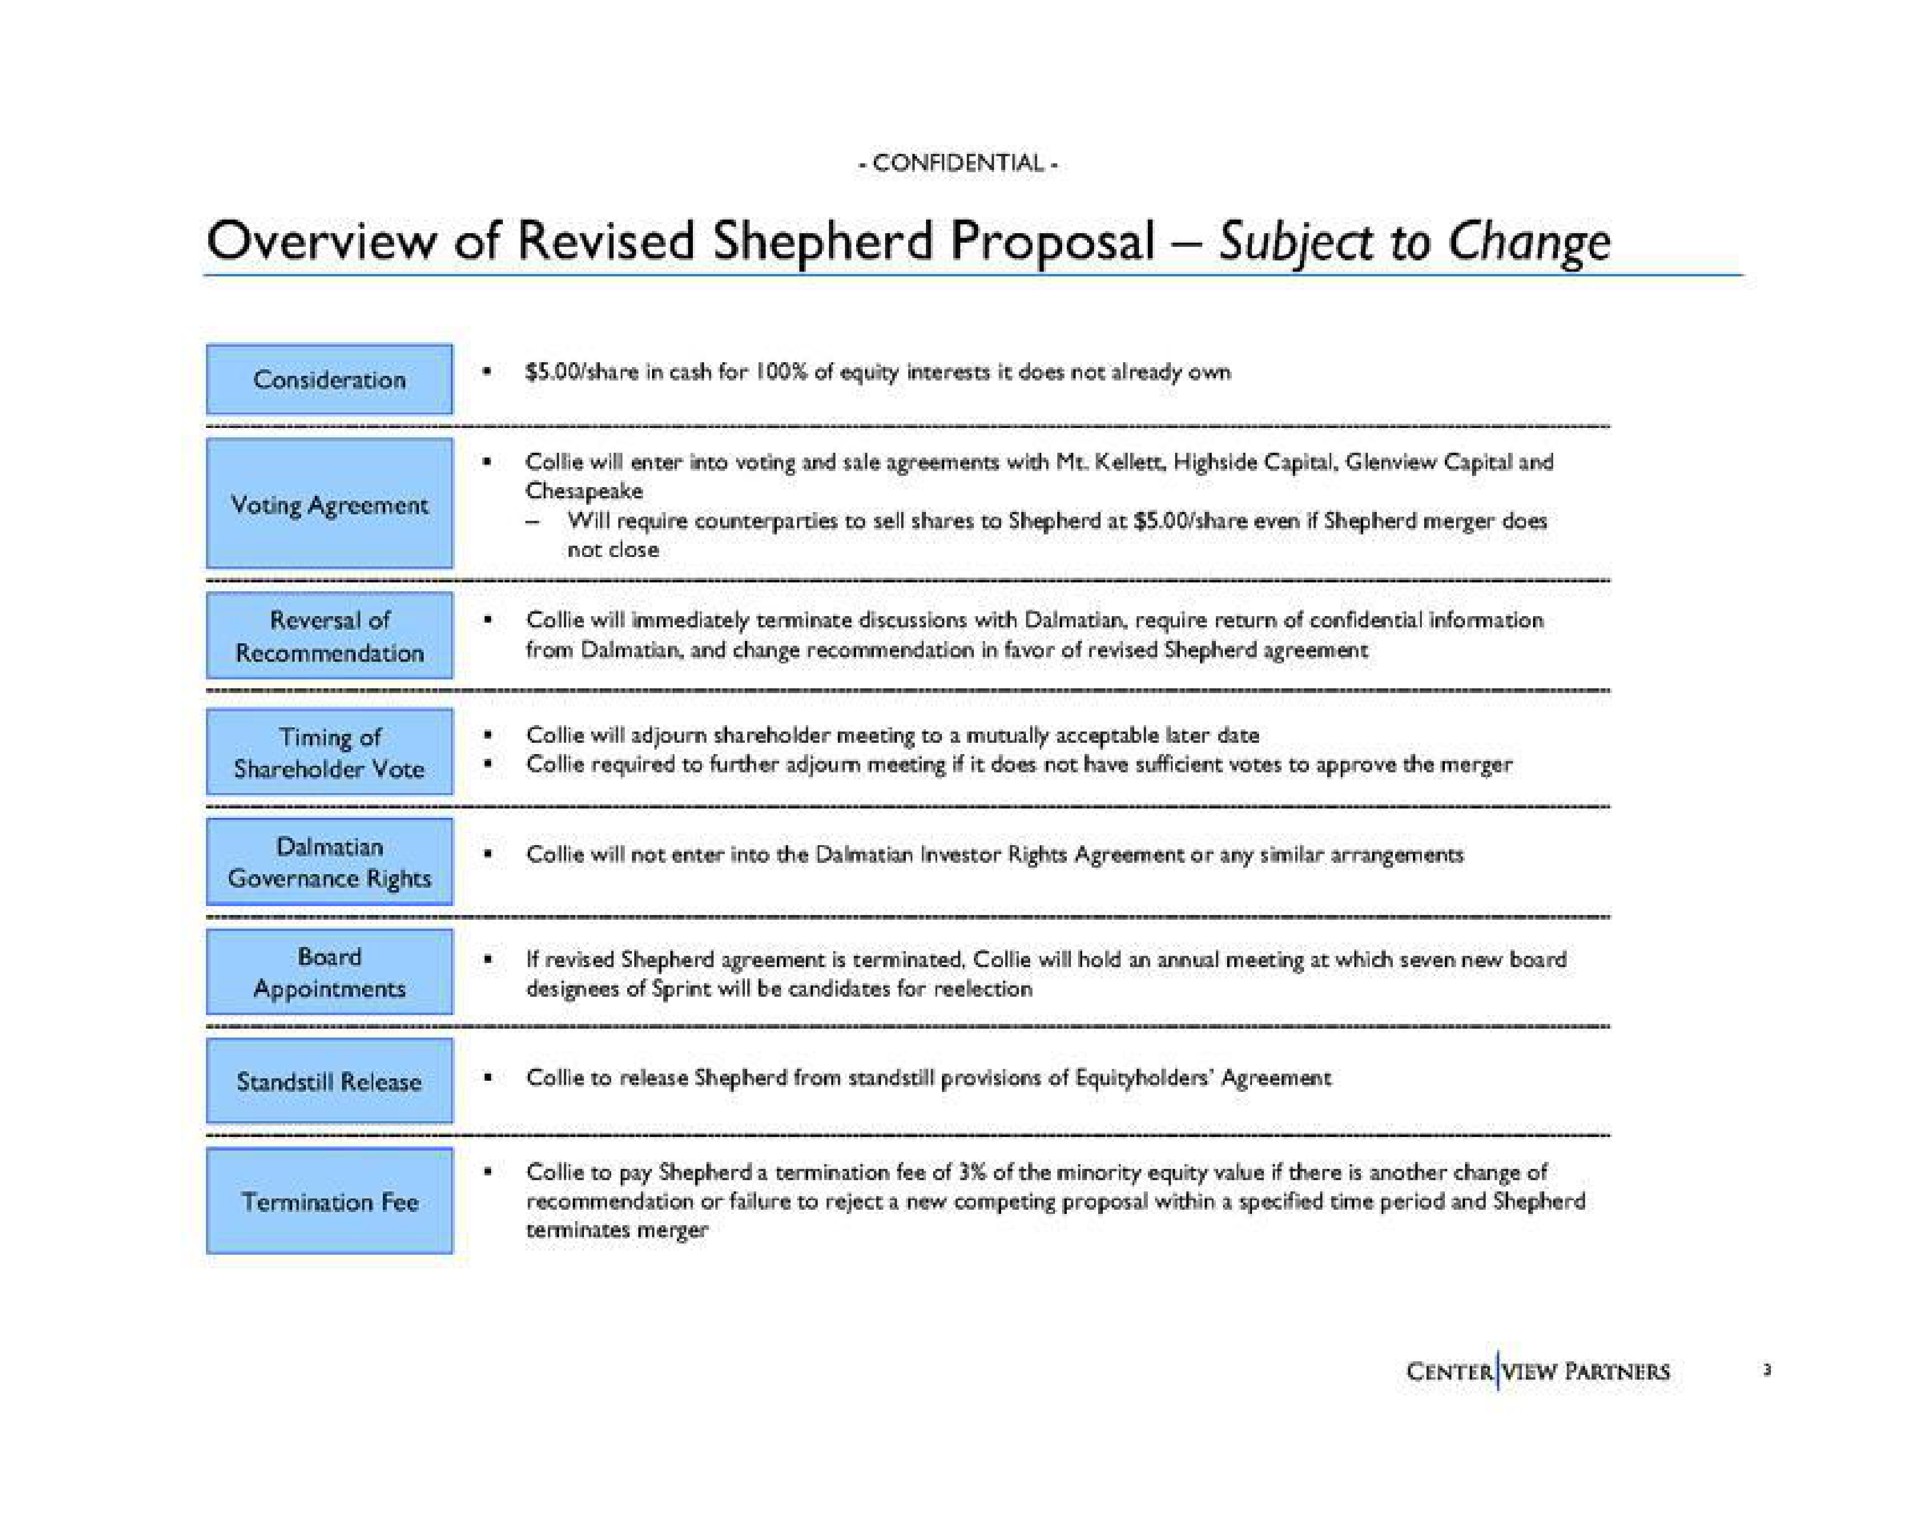 overview of revised shepherd proposal subject to change | Centerview Partners